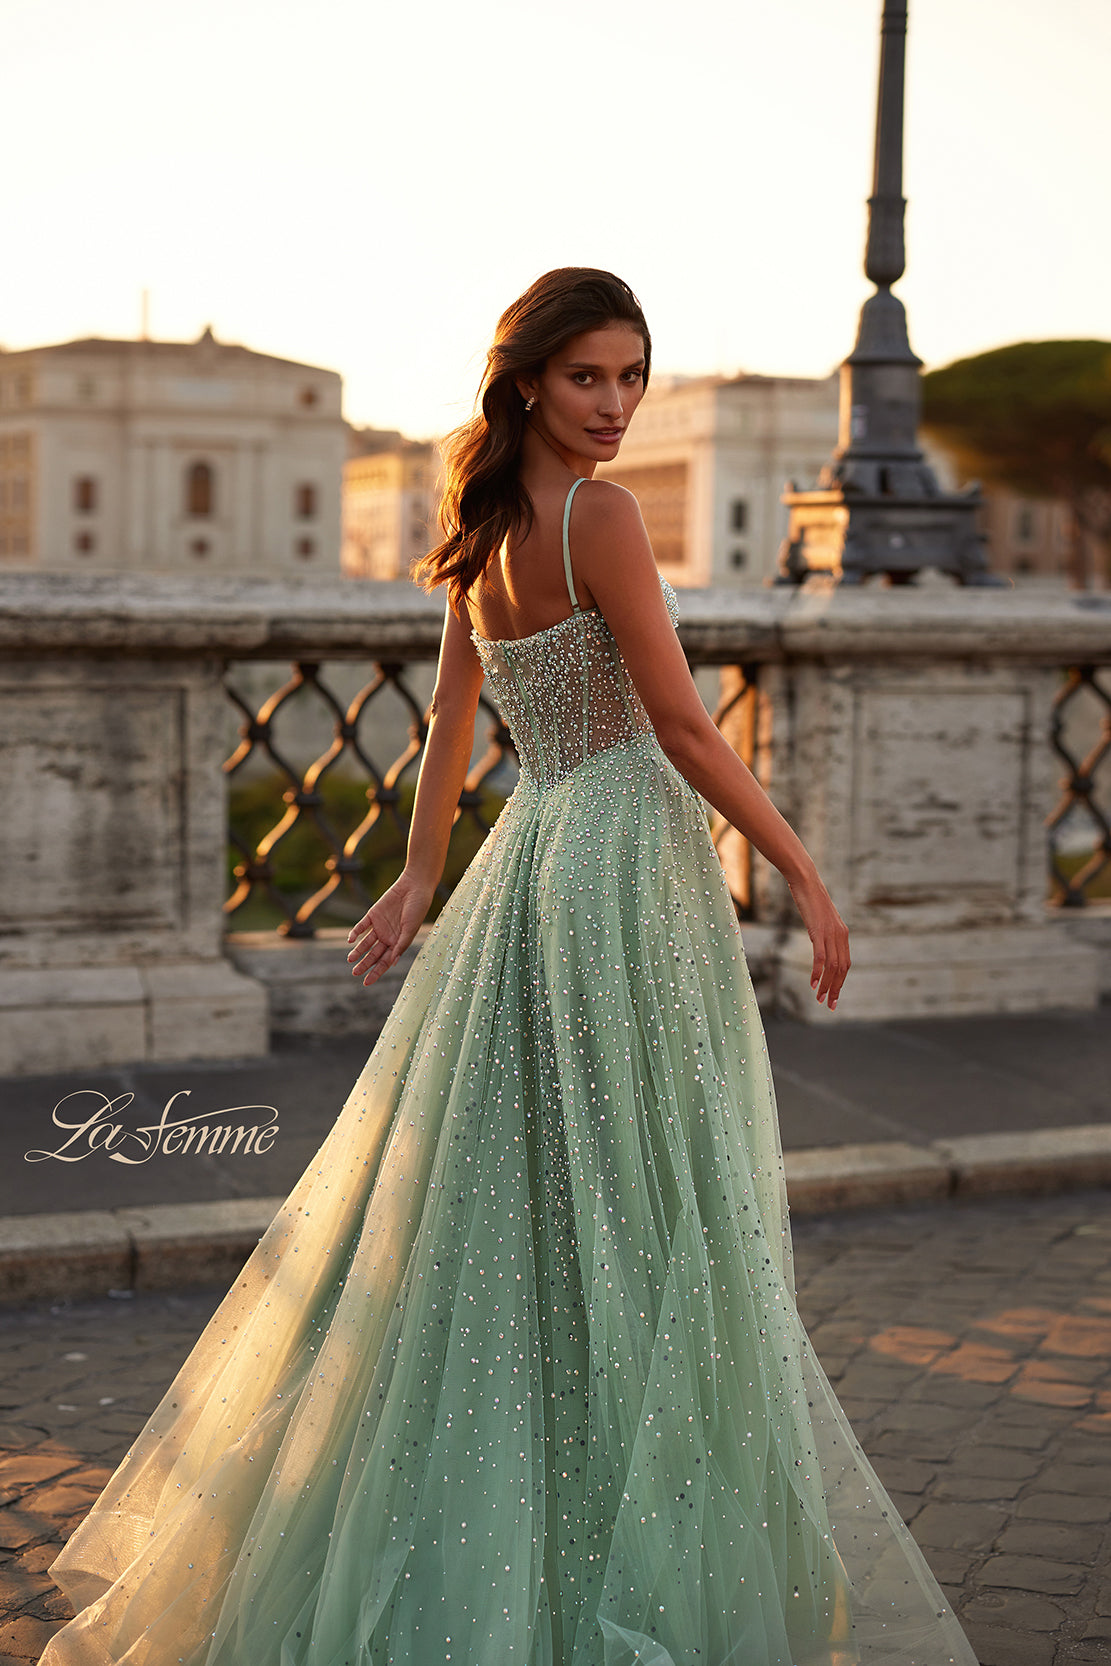 La Femme 32146 Radiant Rhinestone Illusion A-Line Prom Gown - An enchanting prom gown featuring radiant large rhinestones, an alluring illusion bustier bodice, and a V neckline for a dazzling and sophisticated look. The model is wearing sage green.